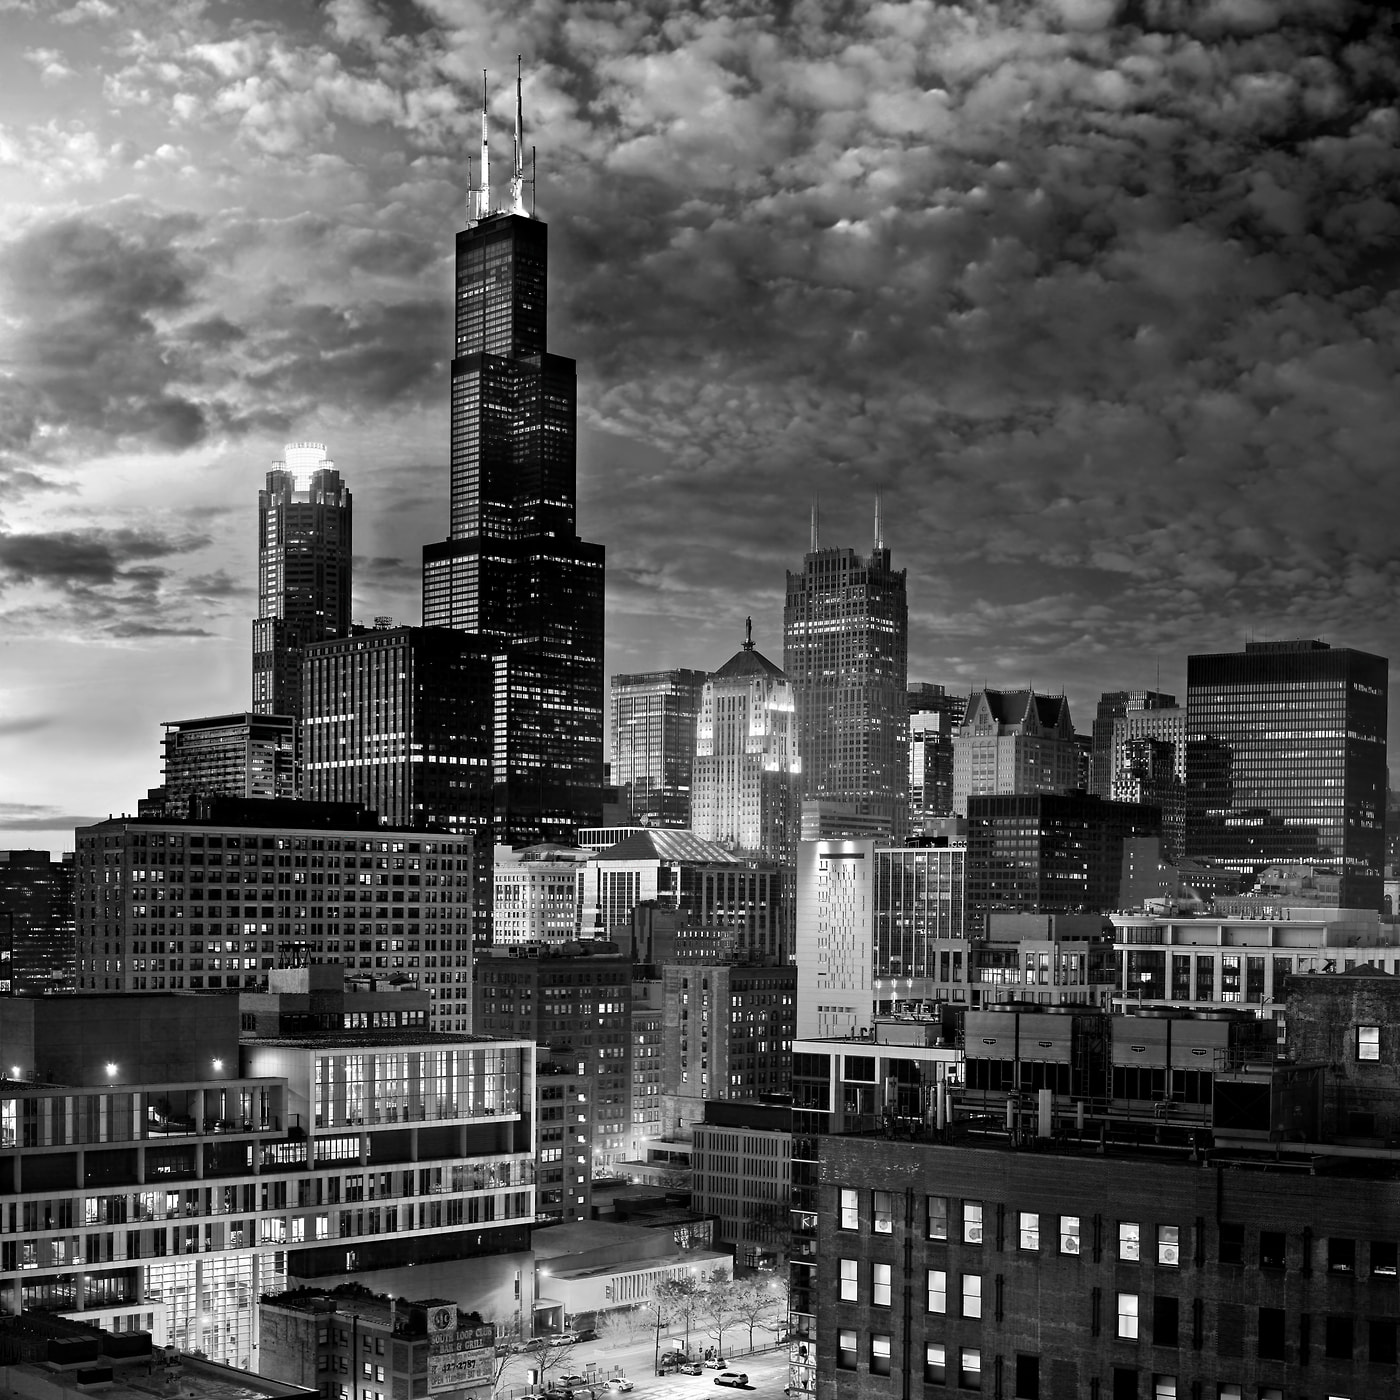 875 megapixels! A very high resolution, black & white VAST photo print of the Chicago skyline with the Willis Tower; cityscape photograph created by Phil Crawshay in Chicago, Illinois.